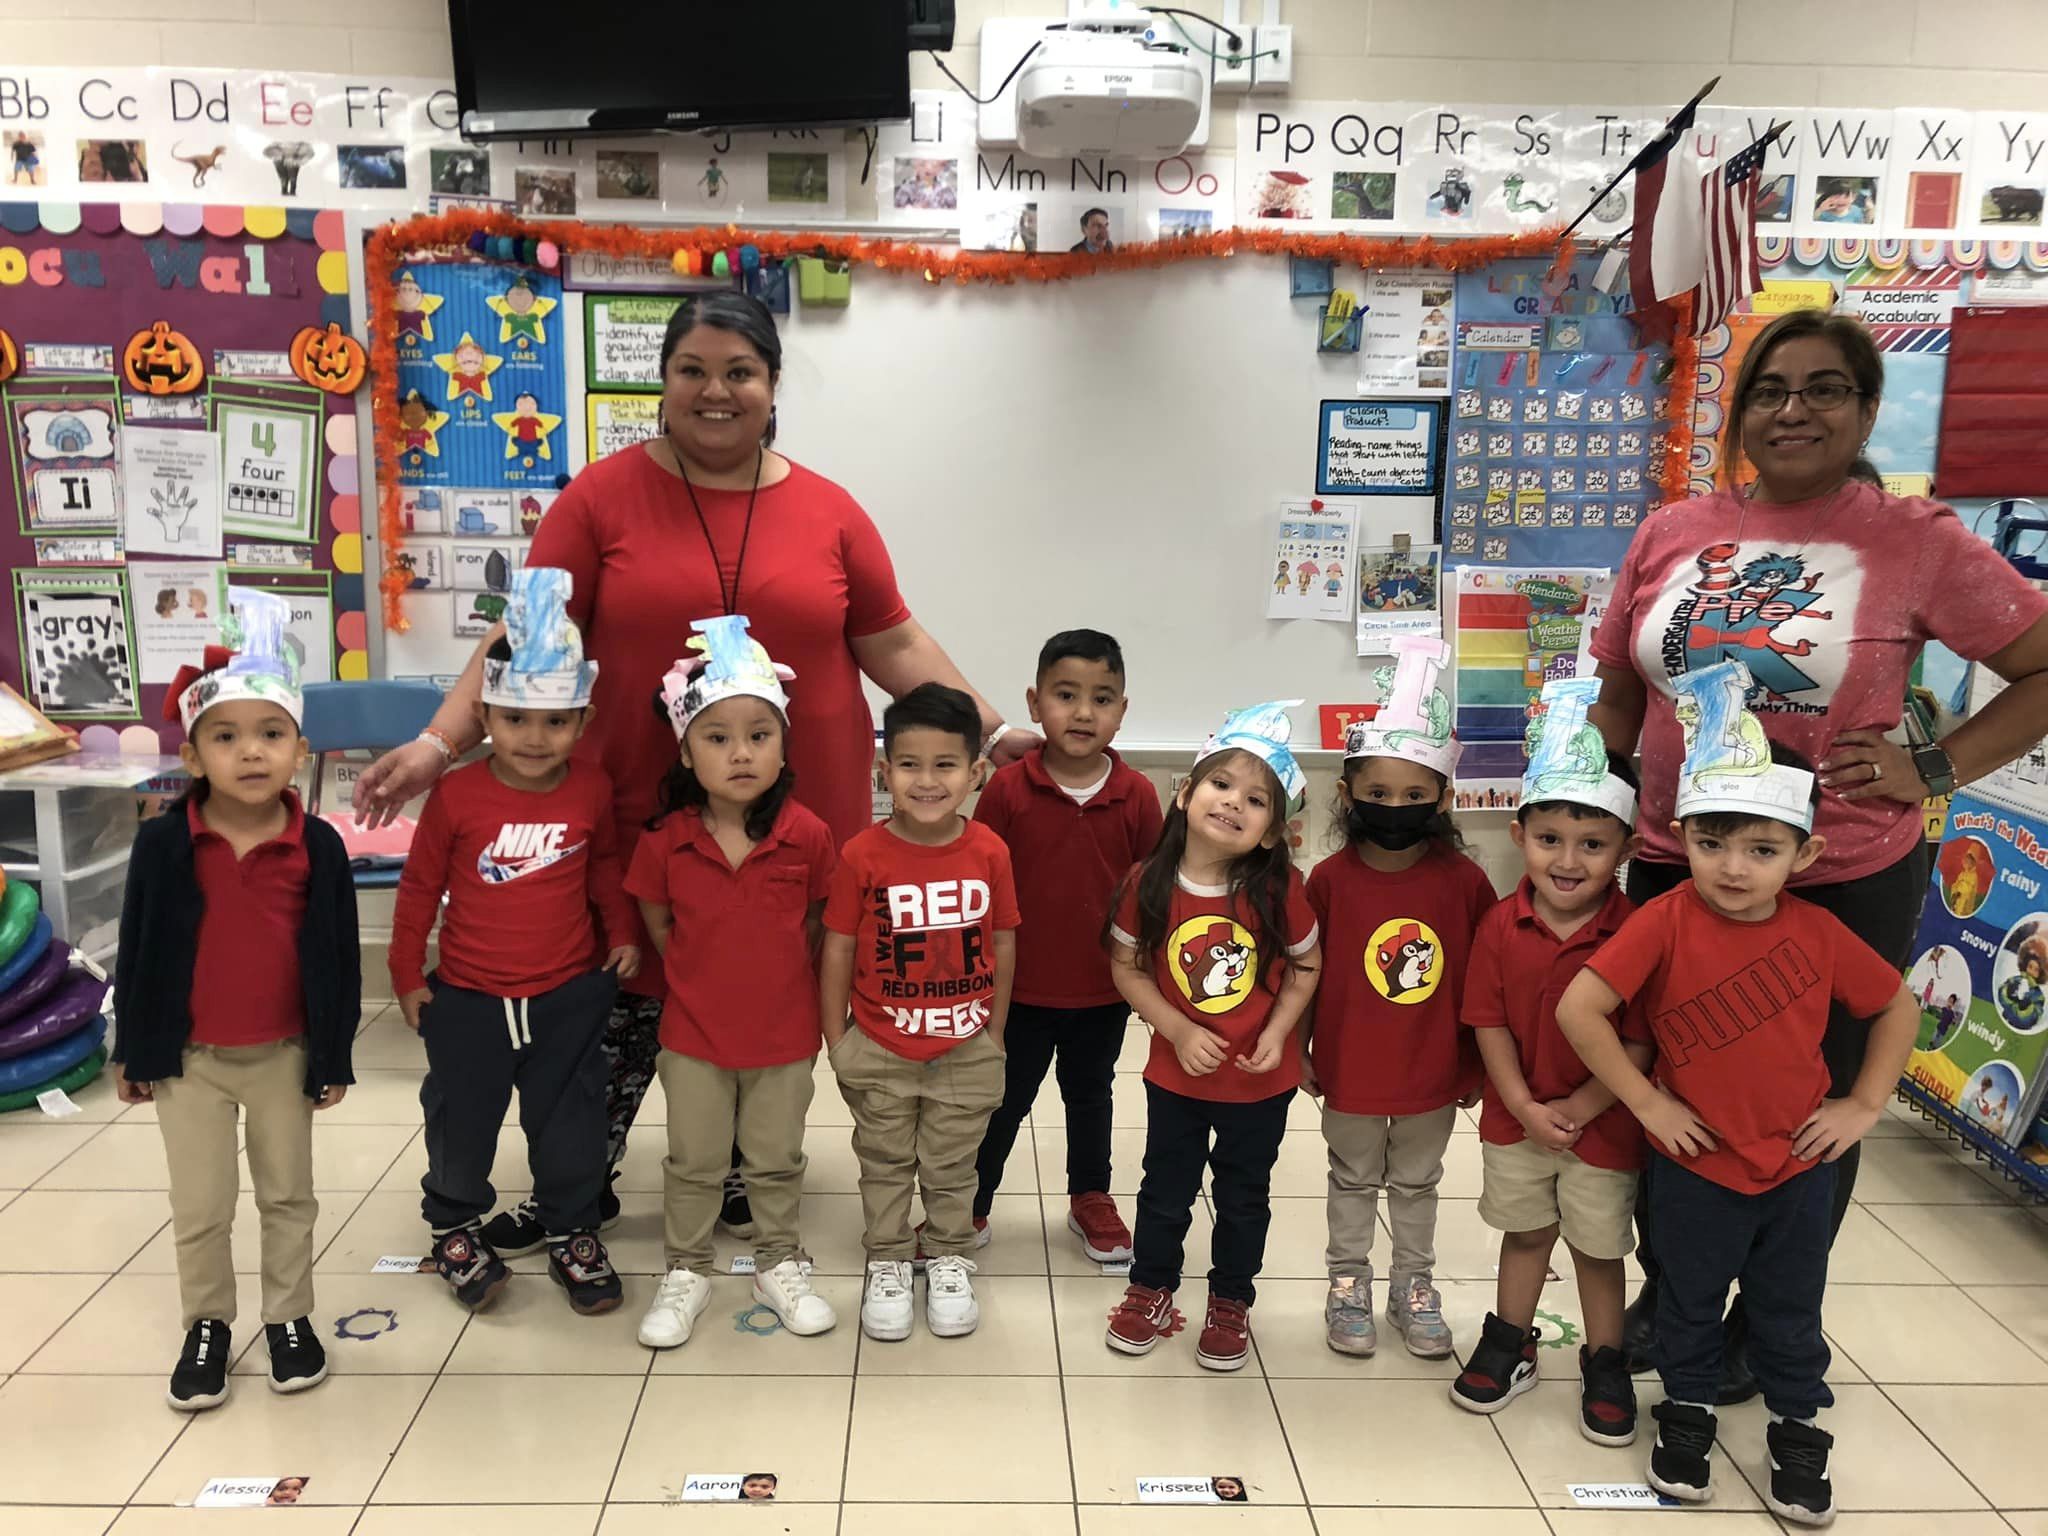 Mrs. Chavarria's PK-3 class in red